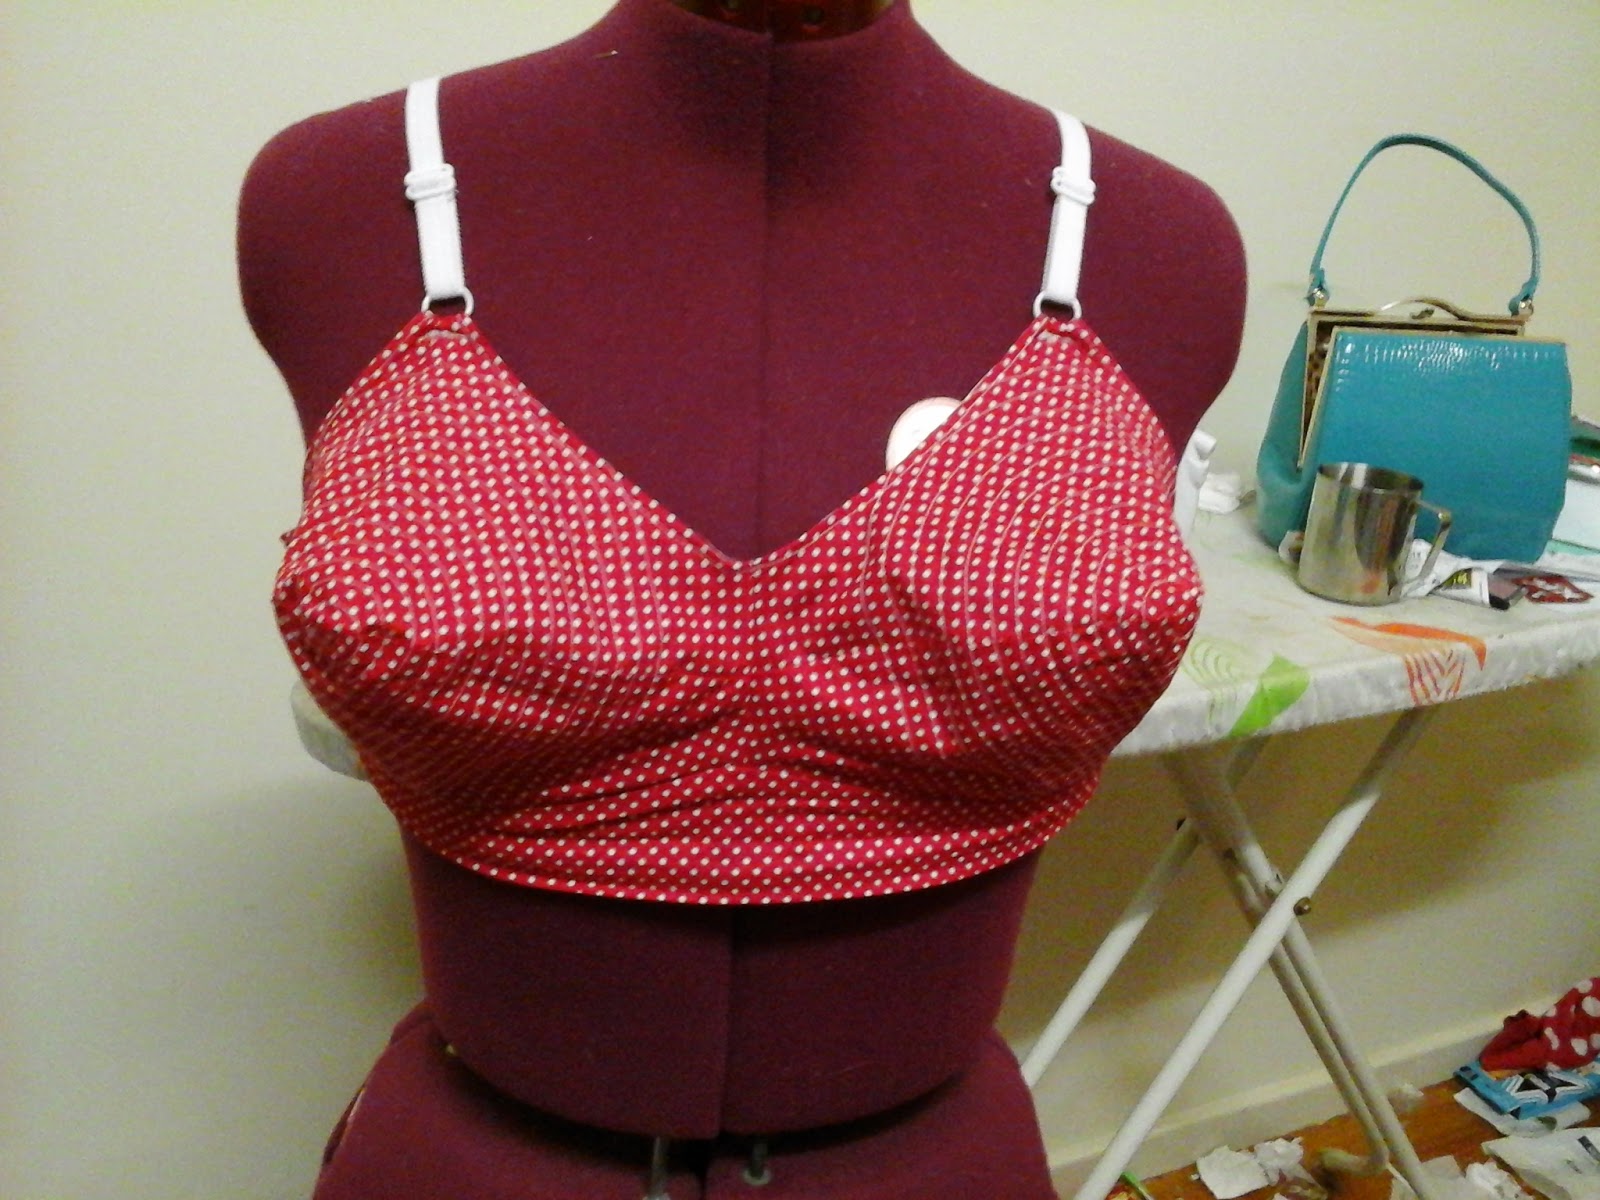 Miss Dixie O'Dare: Sewing a bullet bra